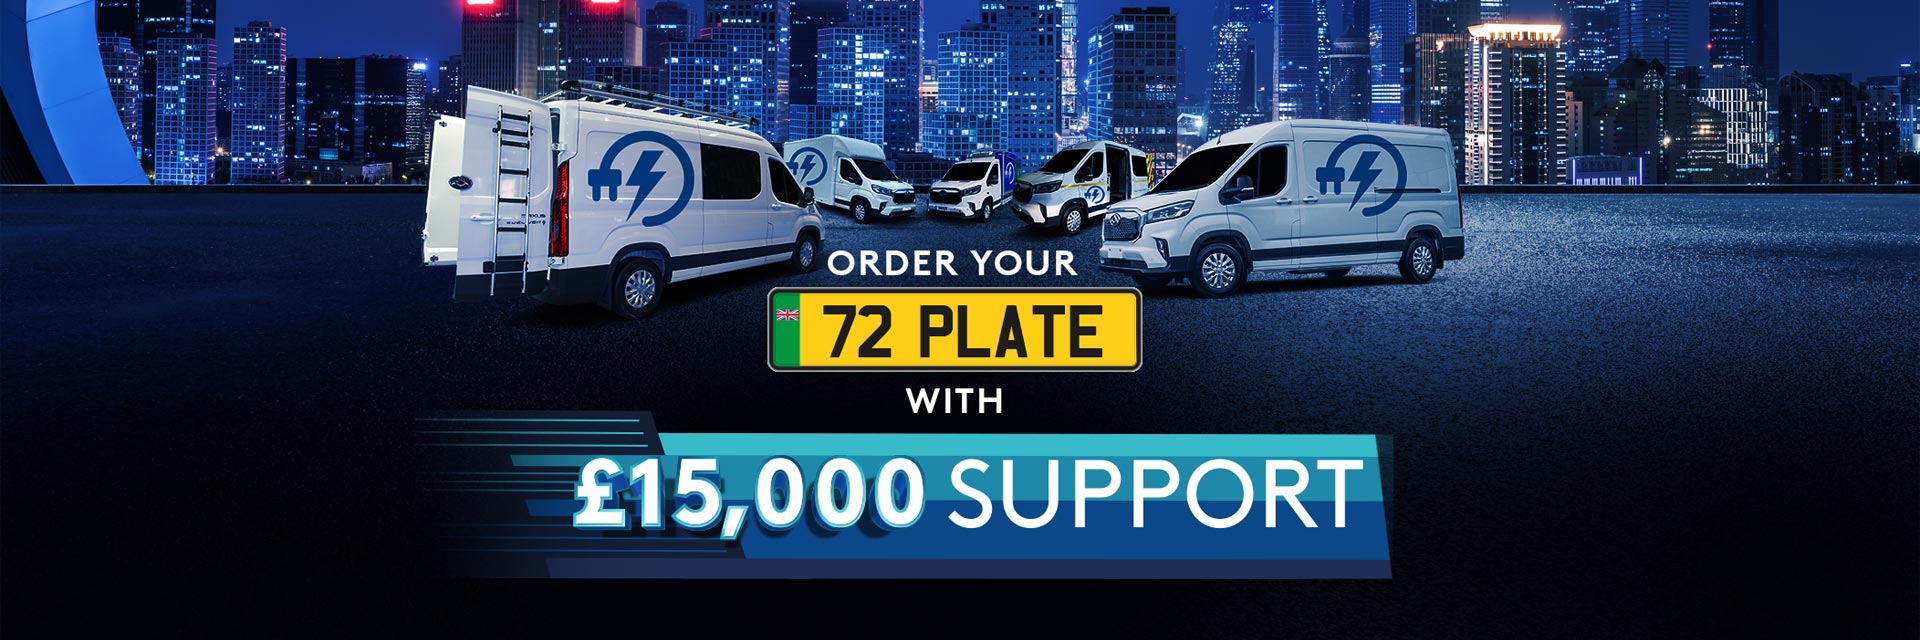 Order the new 72 Plate from HeathrowVanCentre.com